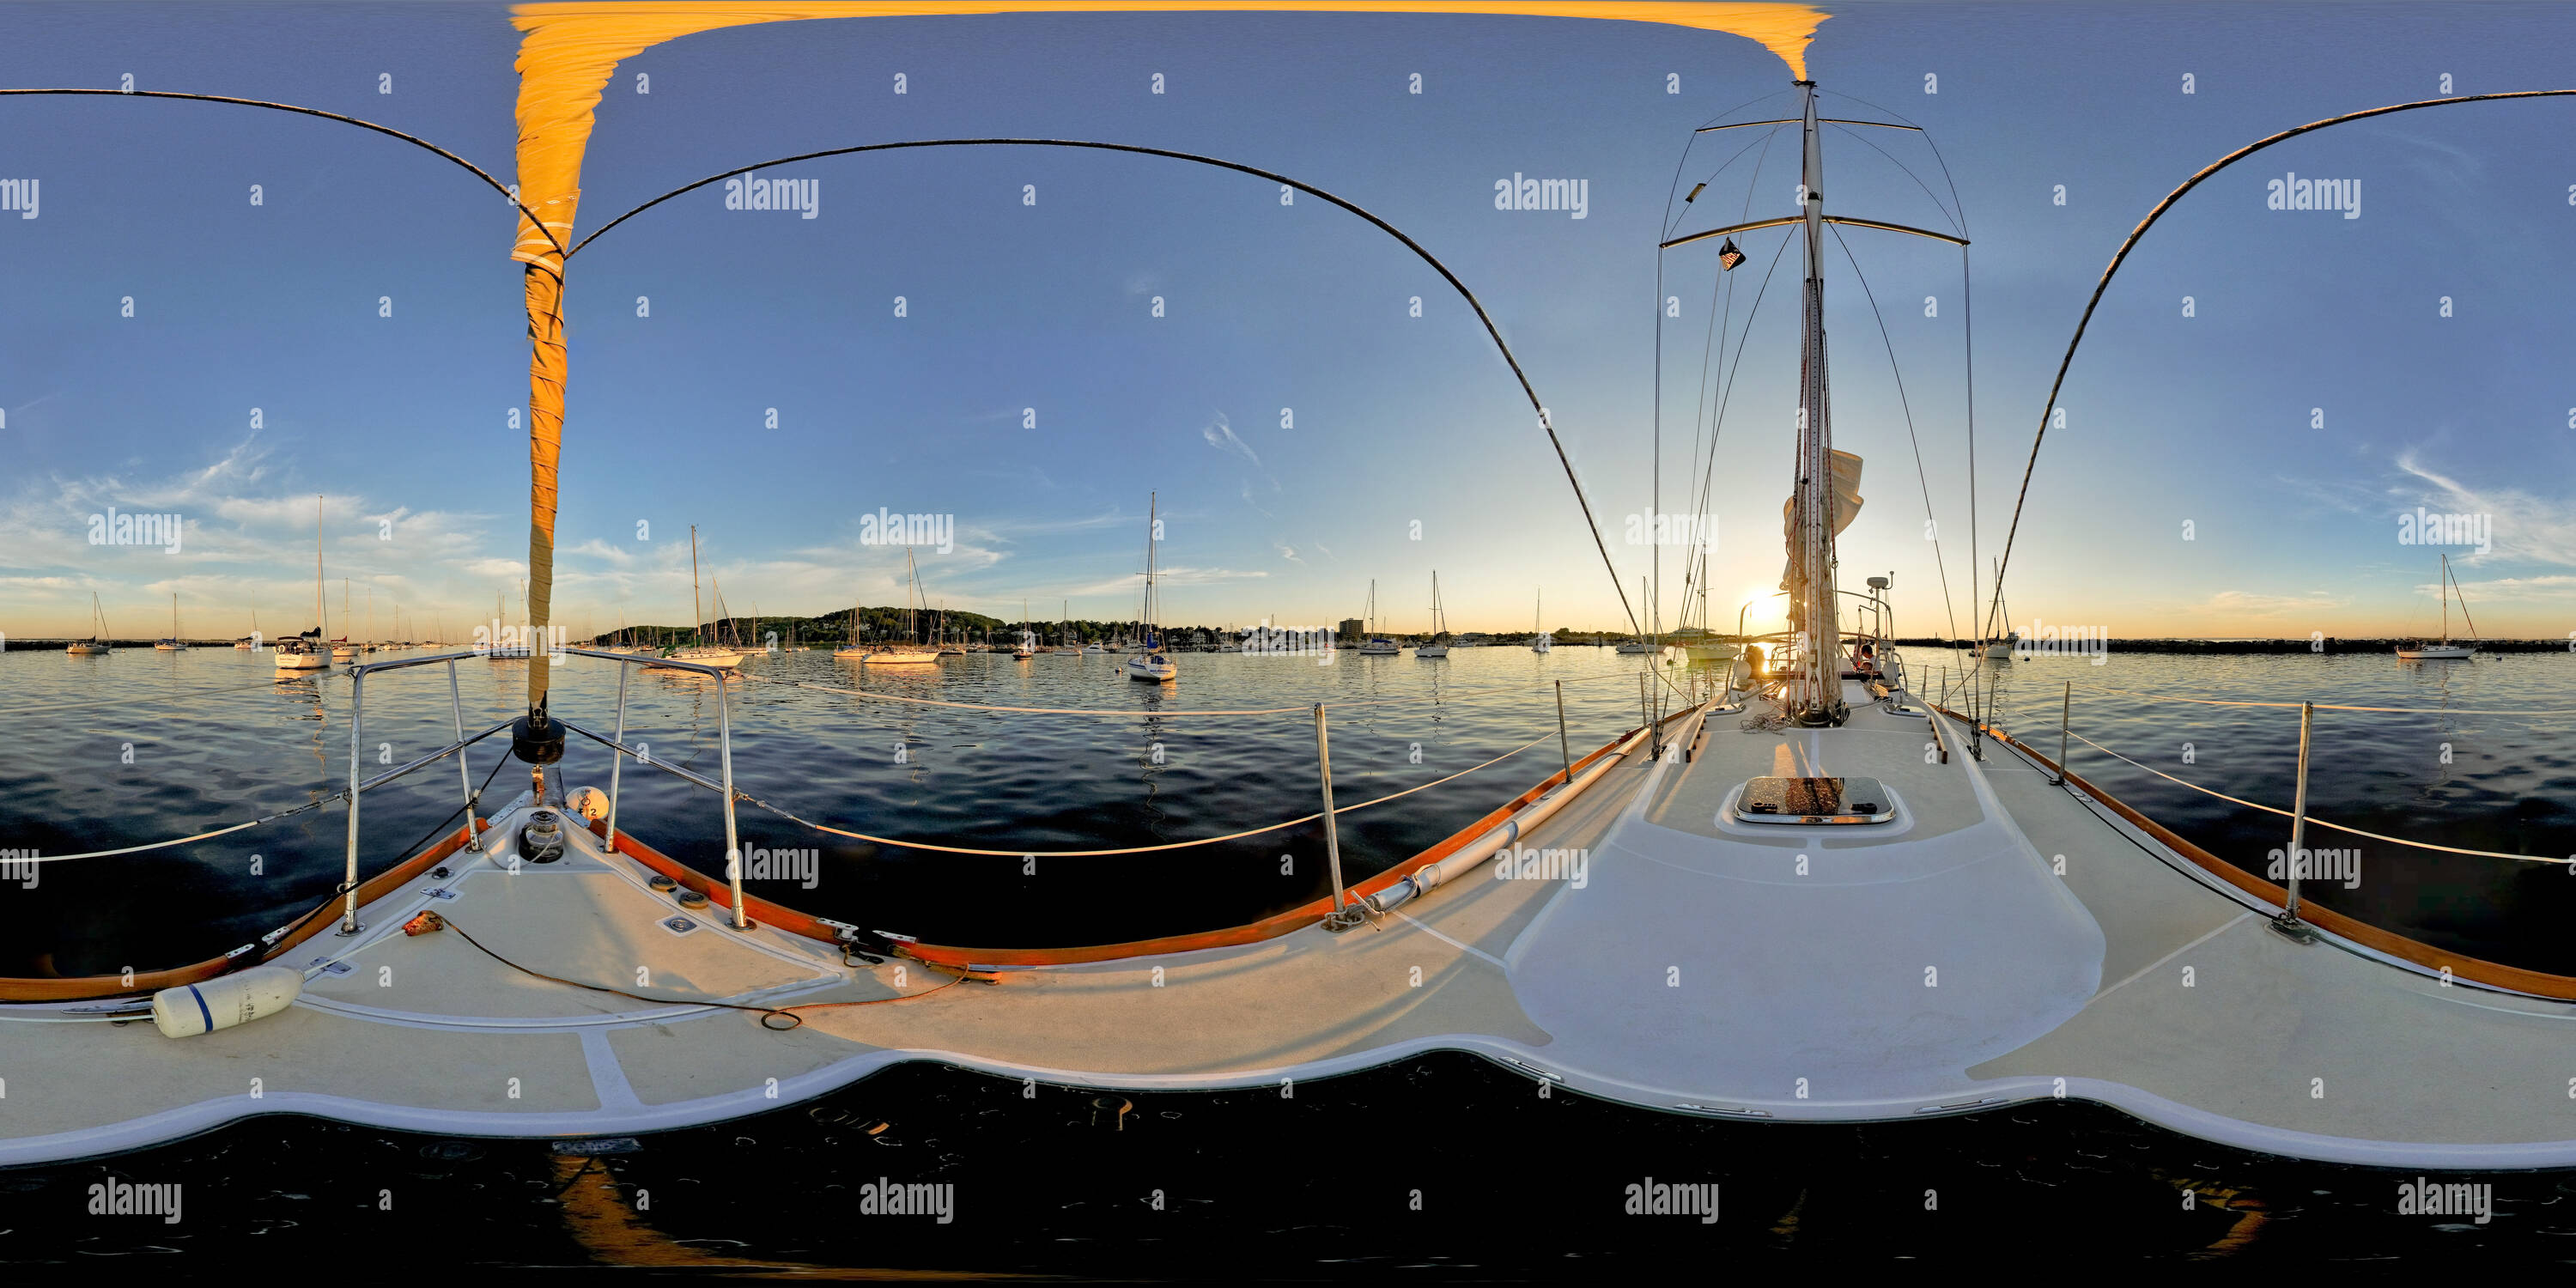 360 degree panoramic view of 'My Time', Atlantic Highlands Harbor, New Jersey